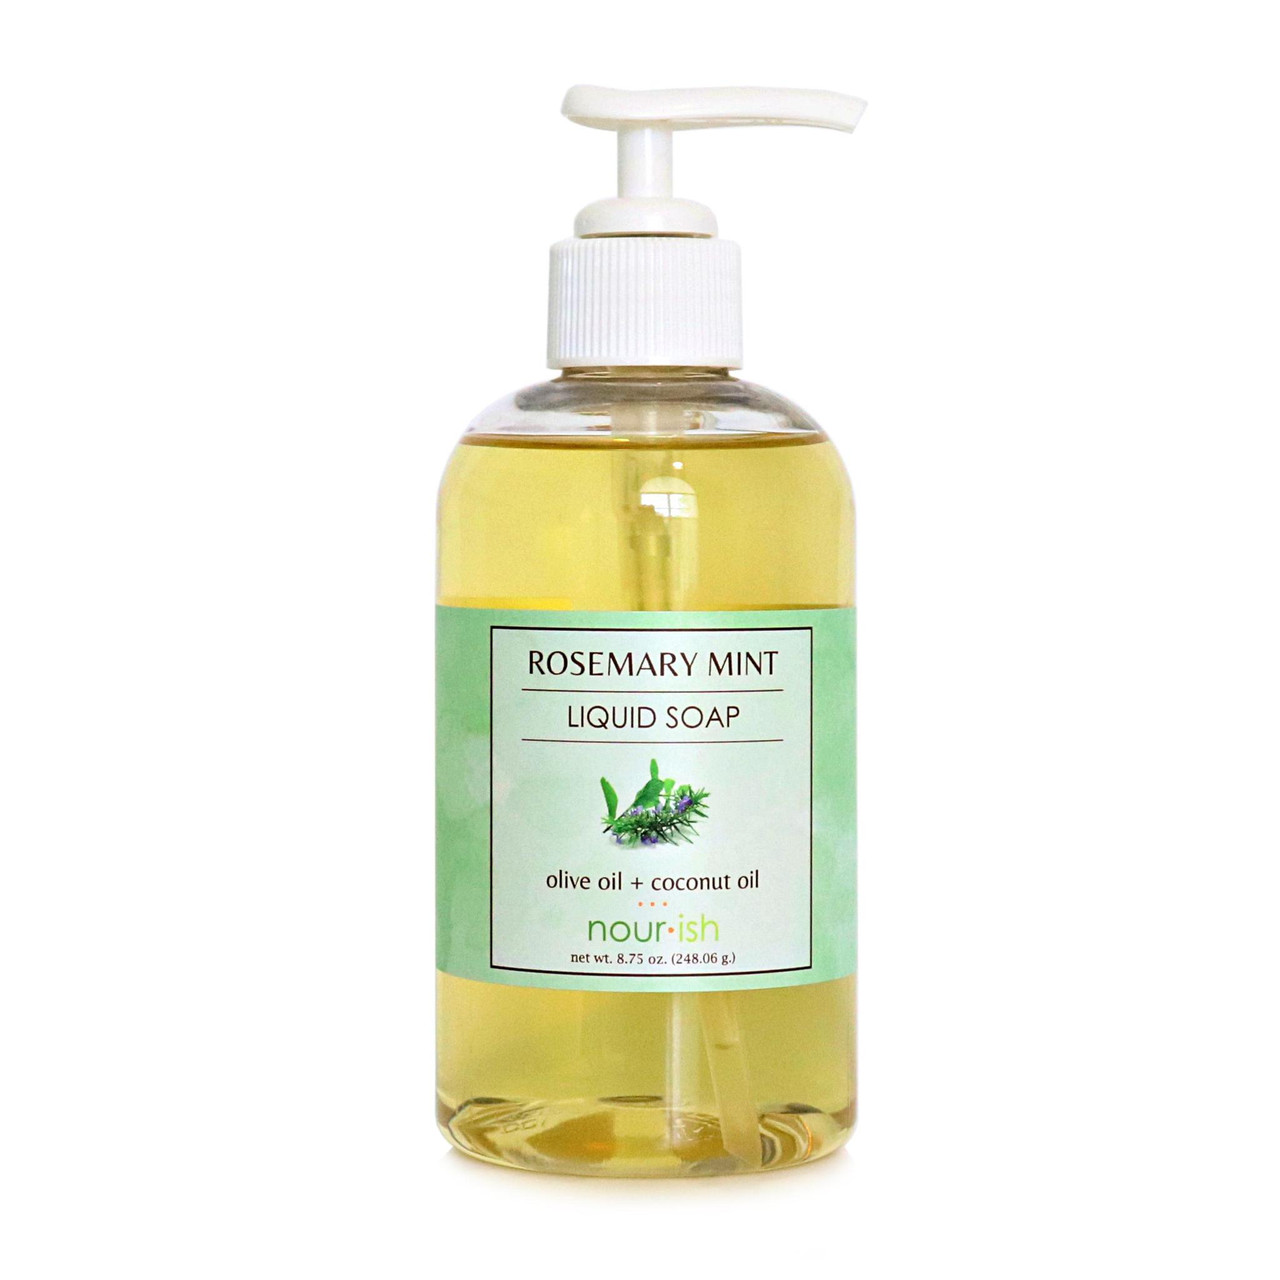 Tiny Kitchen Soap Co. Rosemary Mint Essential Oil Linen and Room Spray –  IKC Design LLC / Tiny Kitchen Soap Co.